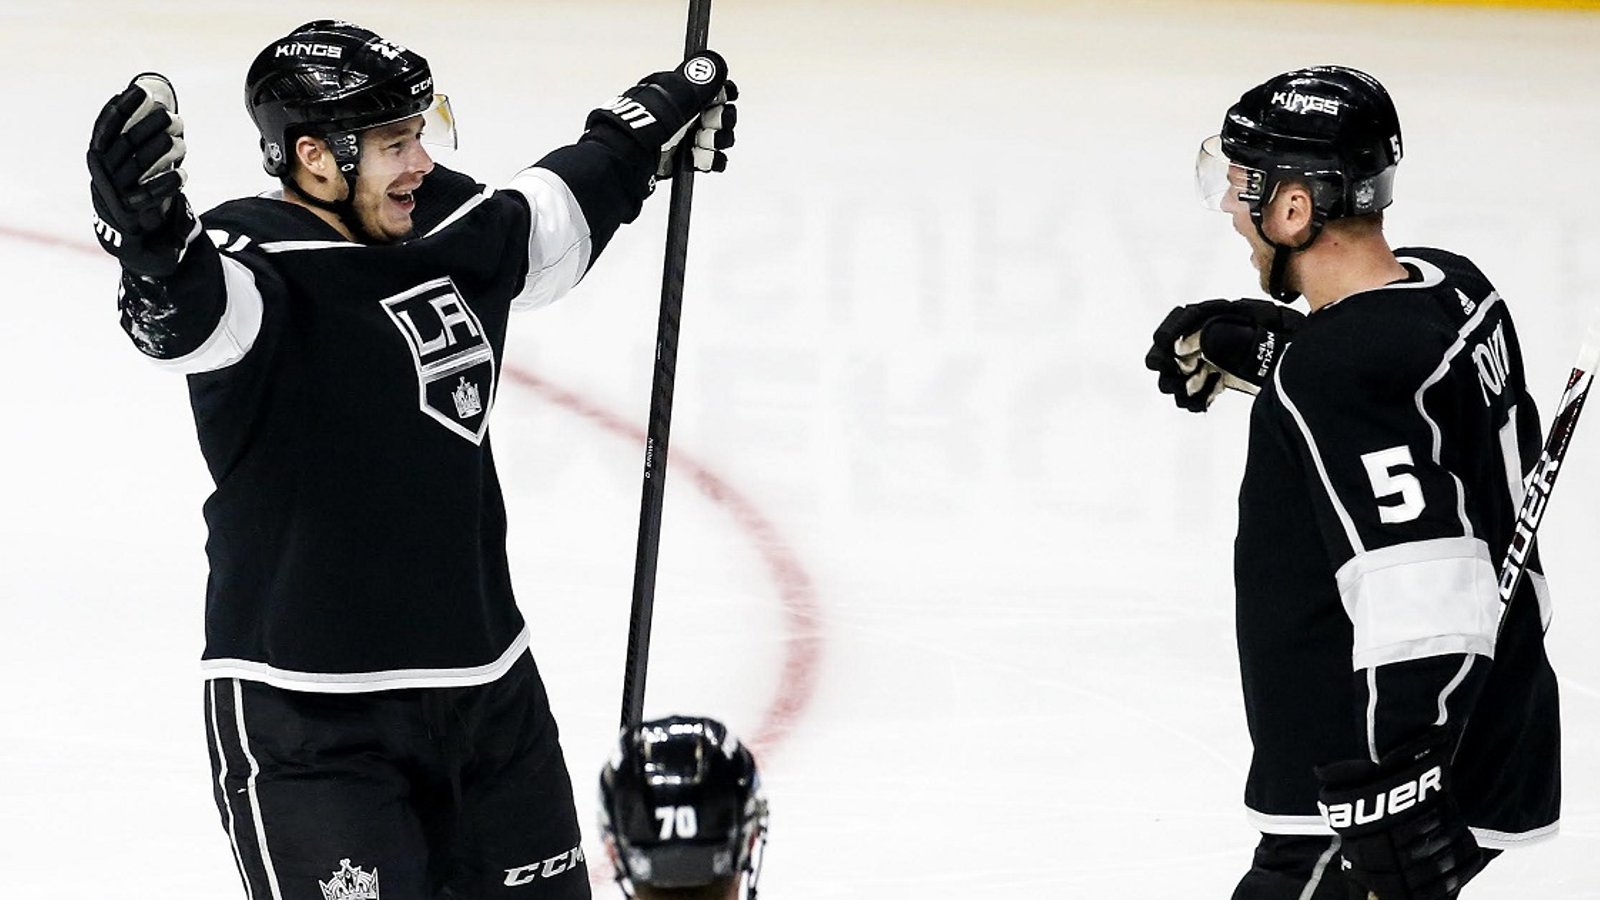 Kings confirm their former captain is out “indefinitely.” 